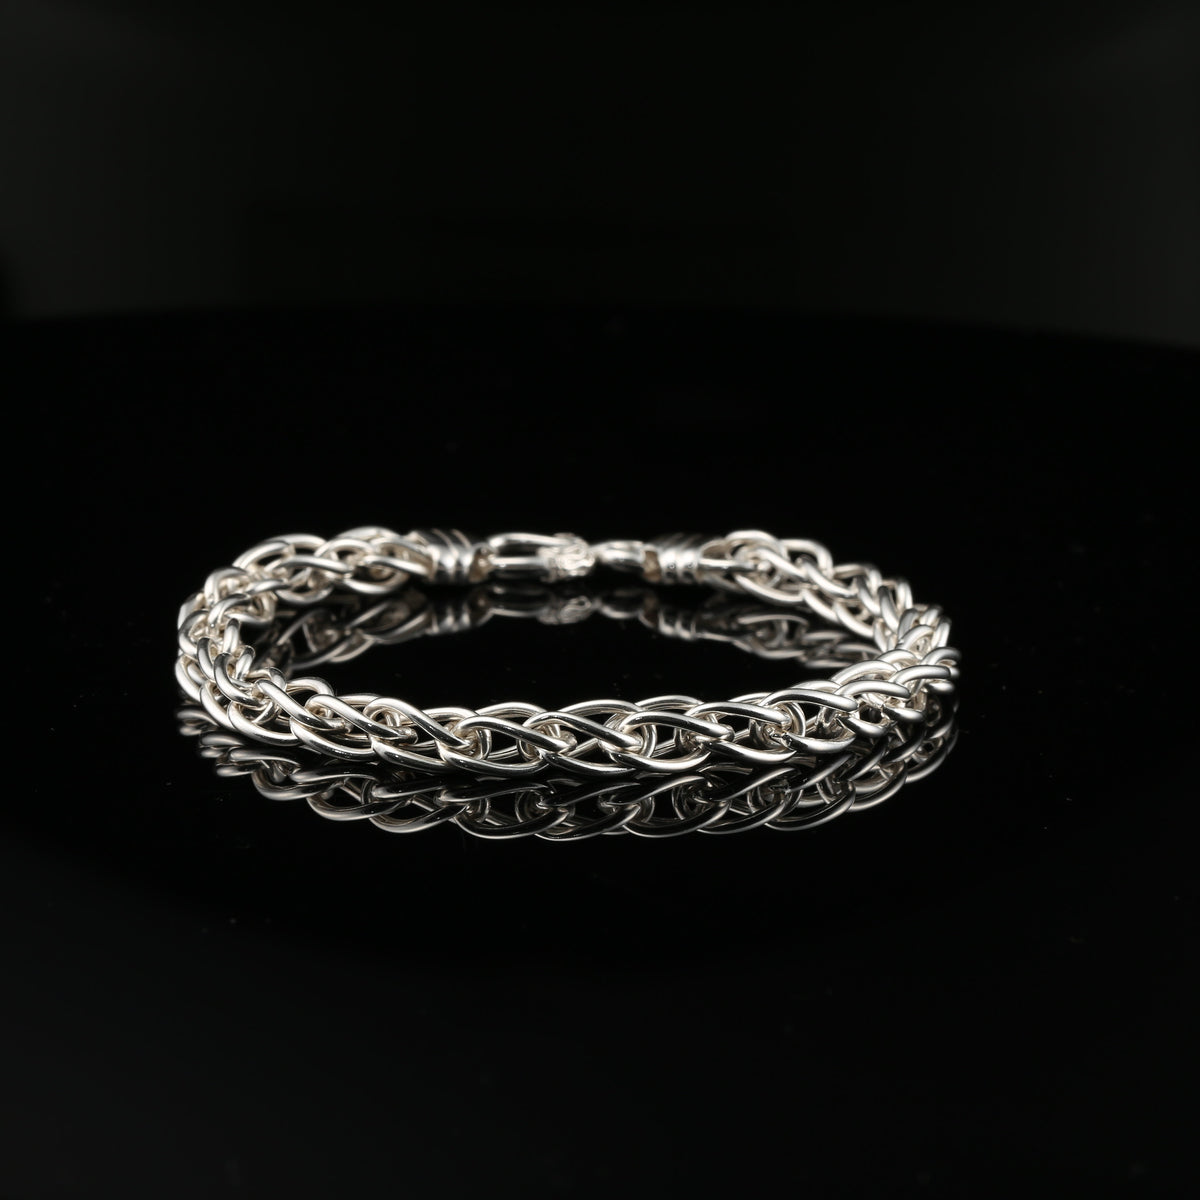 Sterling Silver Byzantine Thick Chain Bracelet with S-Hook Clasp, 8 inch,  Unisex